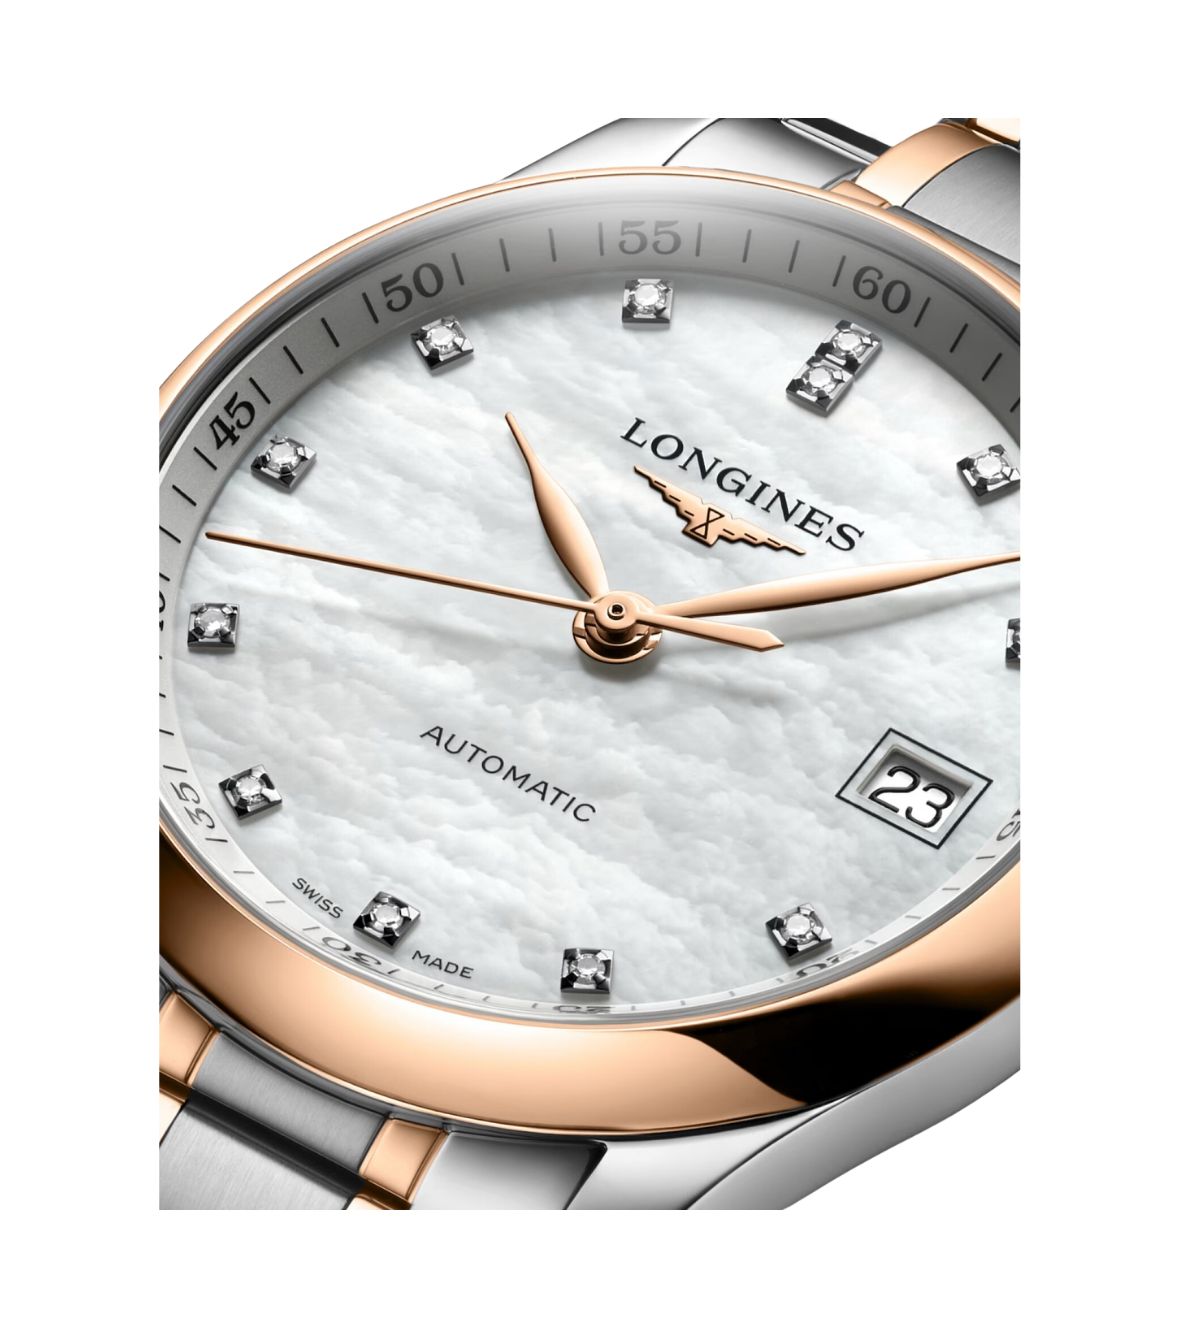 The Longines Master Collection L23575897